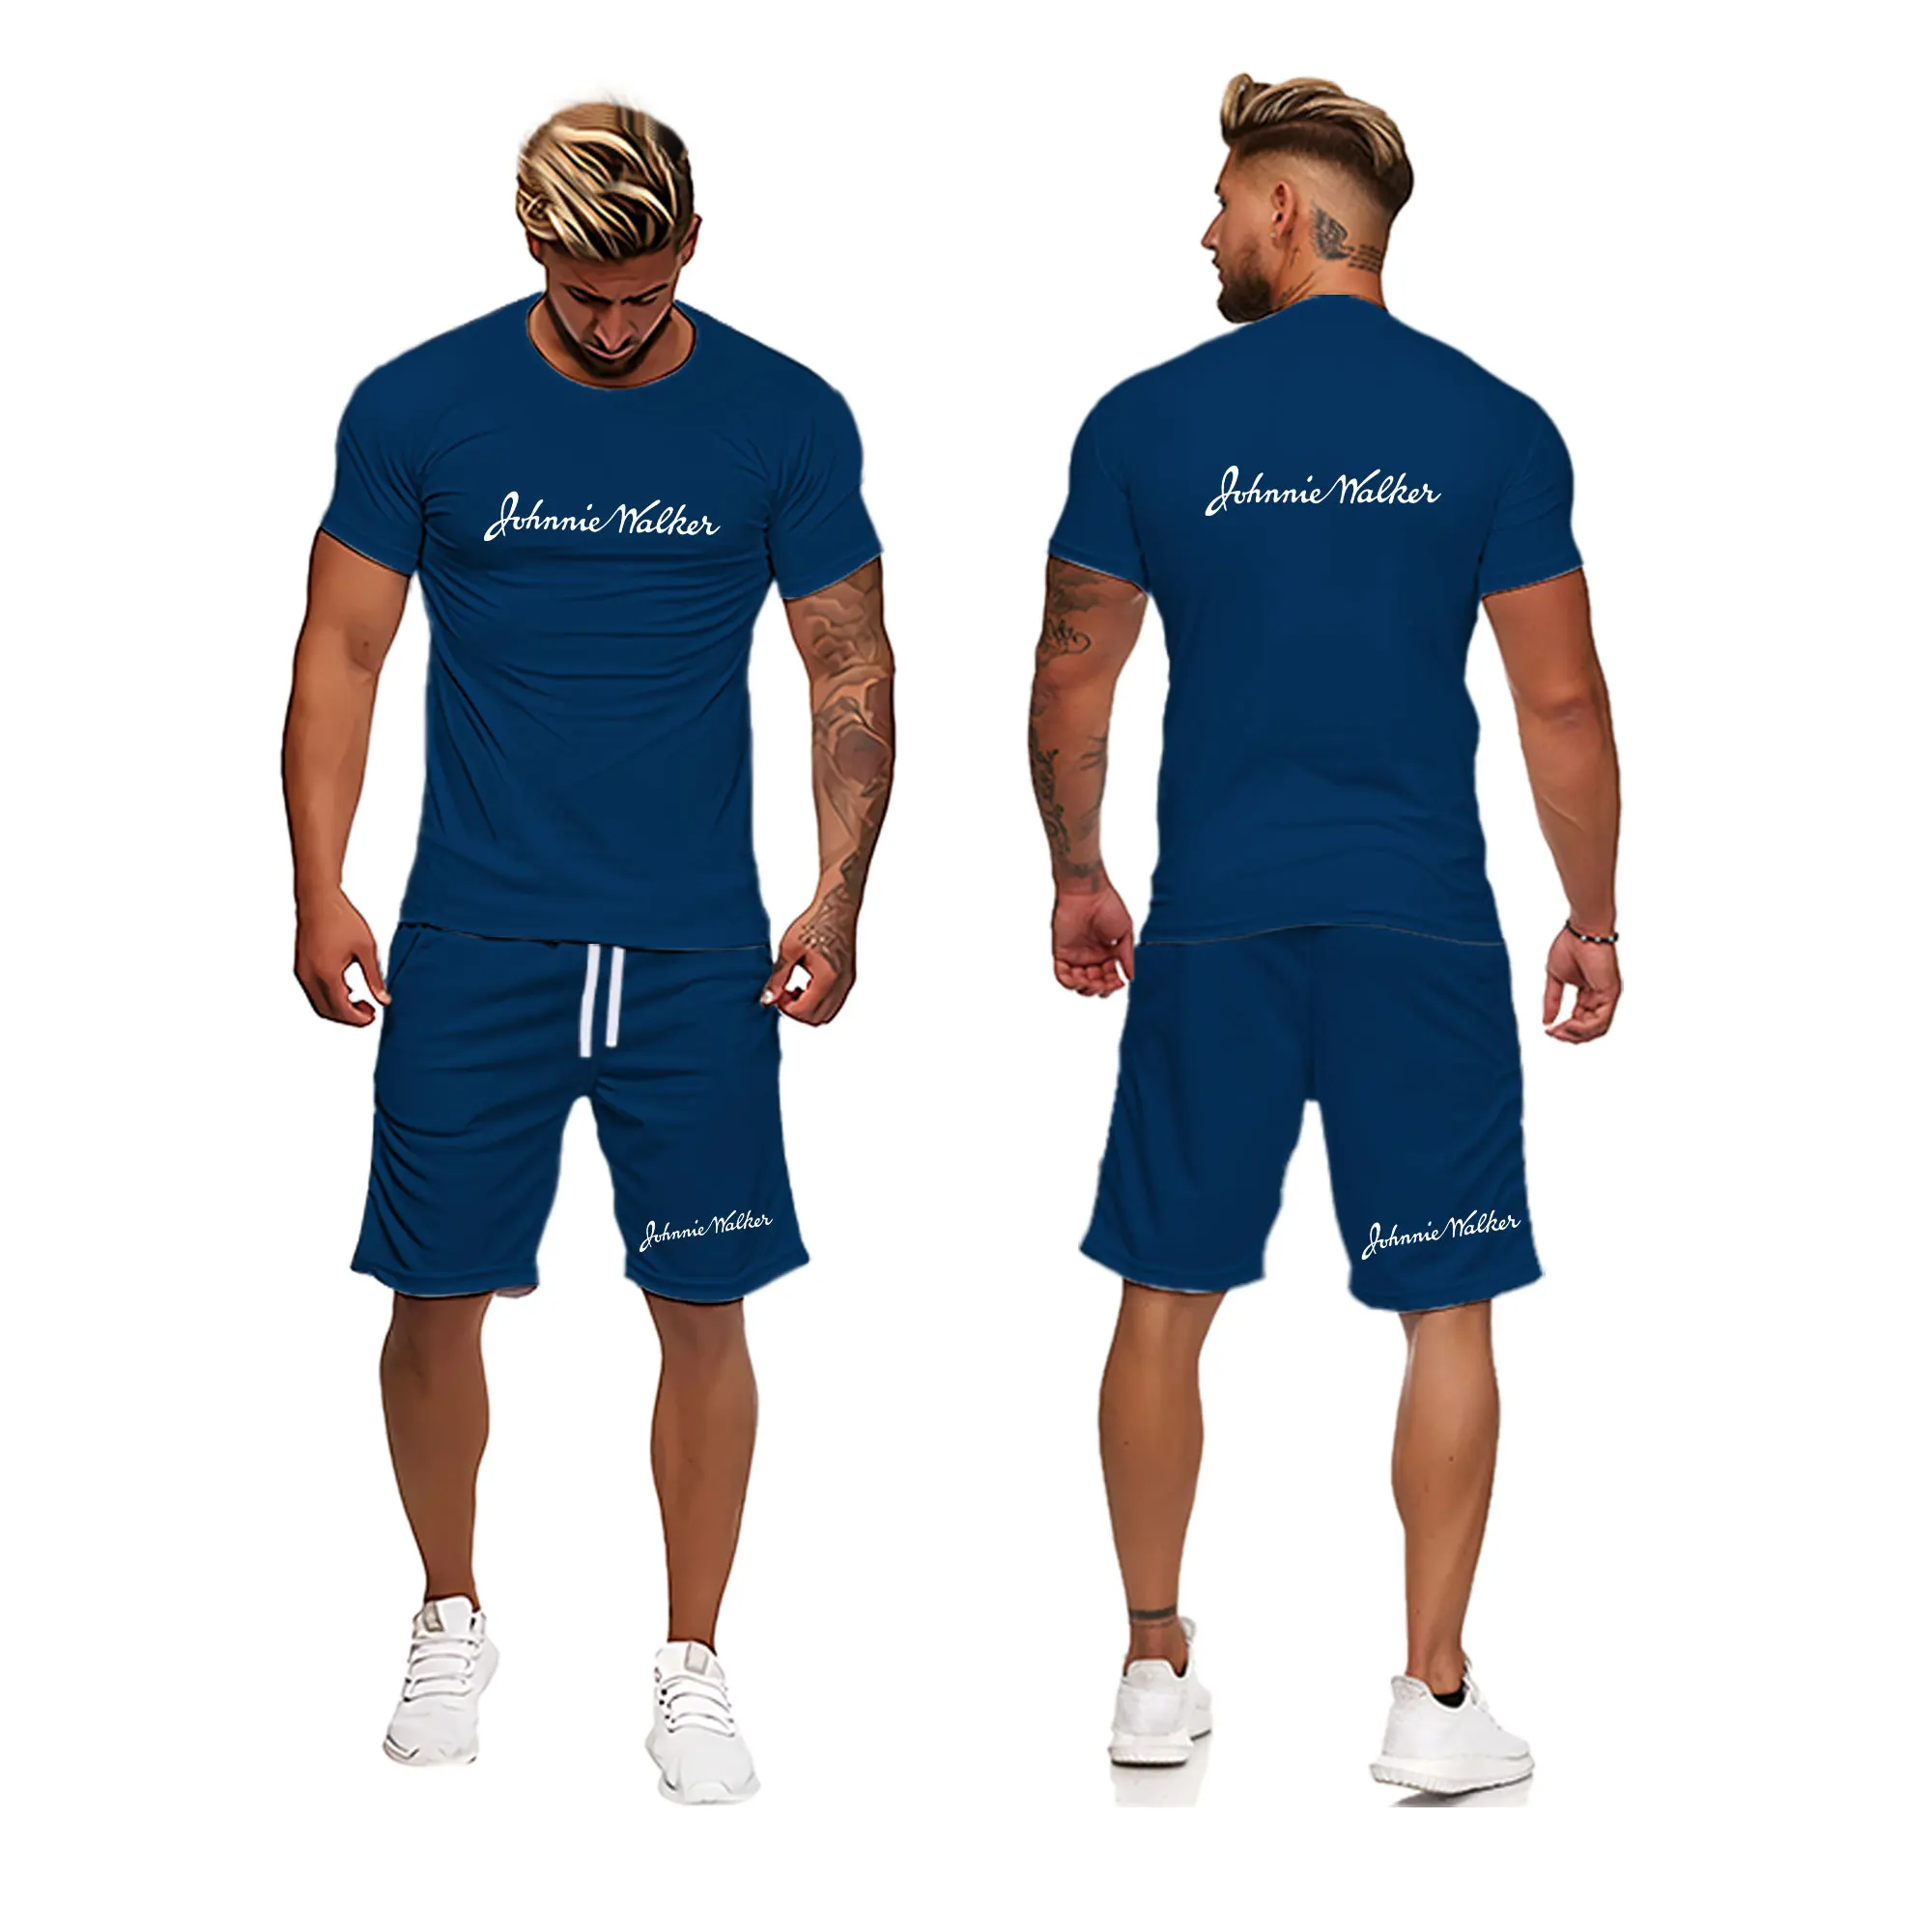 2022 Summer Men's T-Shirt Set material Comfortable and Cool Men Tracksuit T-shirt Shorts outfits Sets Oversized Cloth